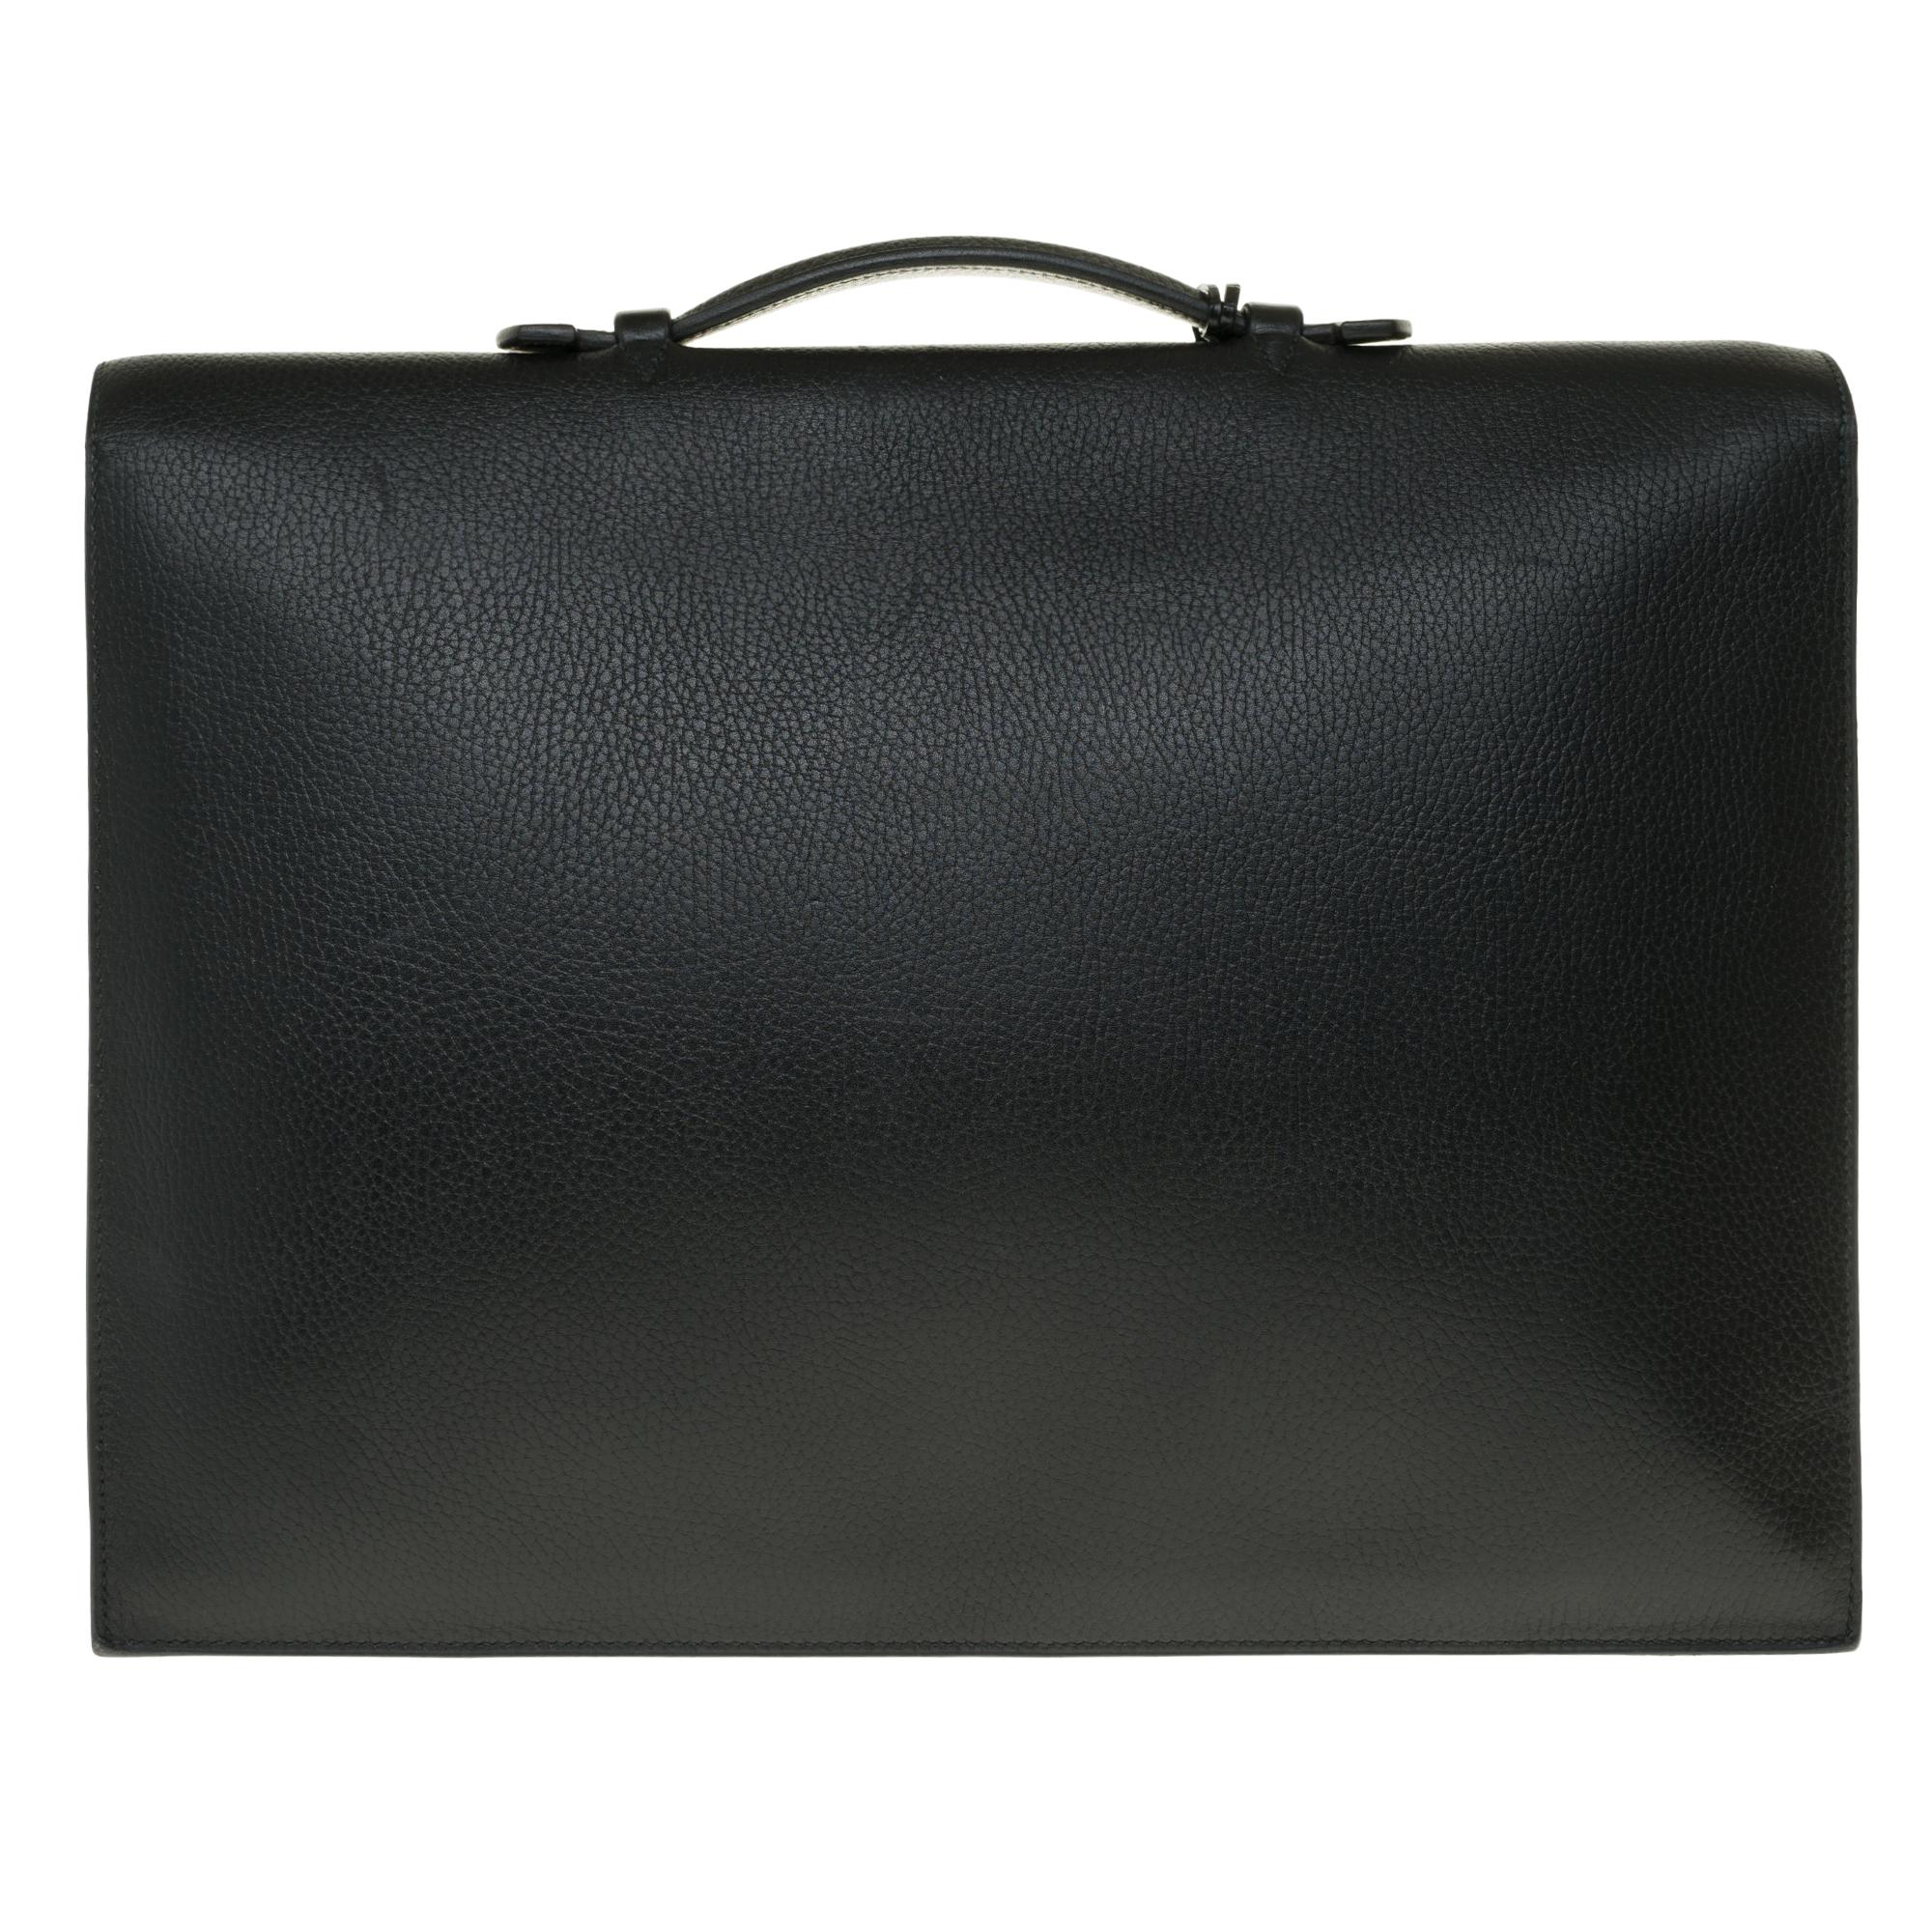 Very chic Hermès Briefcase Messenger bag in black togo leather customized with black Crocodile porosus (closure tab and tirette and clochette), palladium silver metal hardware, simple black leather handle allowing a handheld.

Flip latch closure on